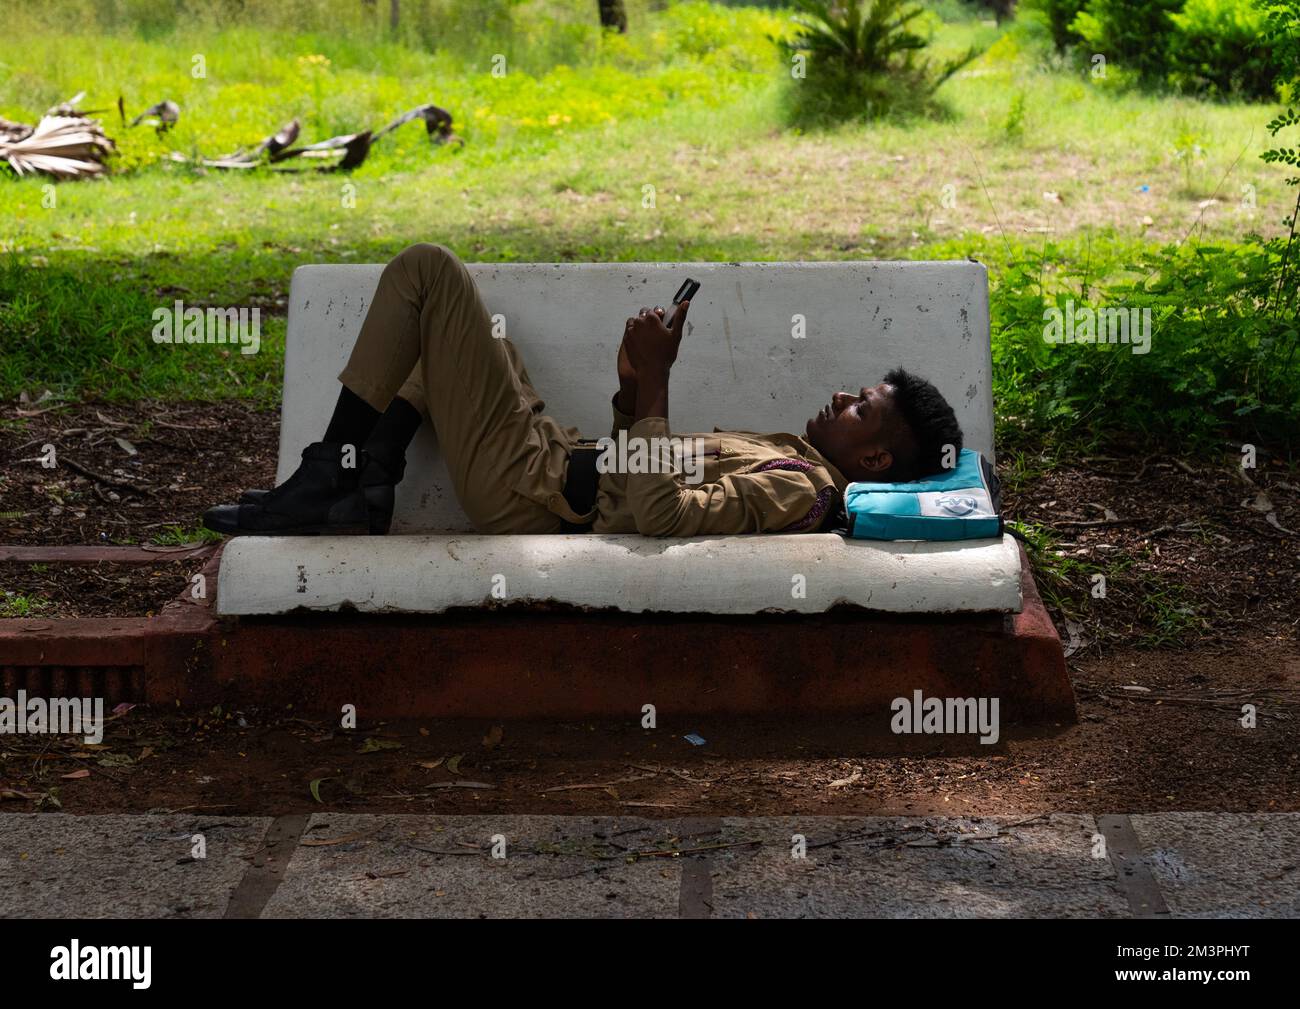 Indian soldier texting on his mobile phone on a bench in a park, Pondicherry, Puducherry, India Stock Photo